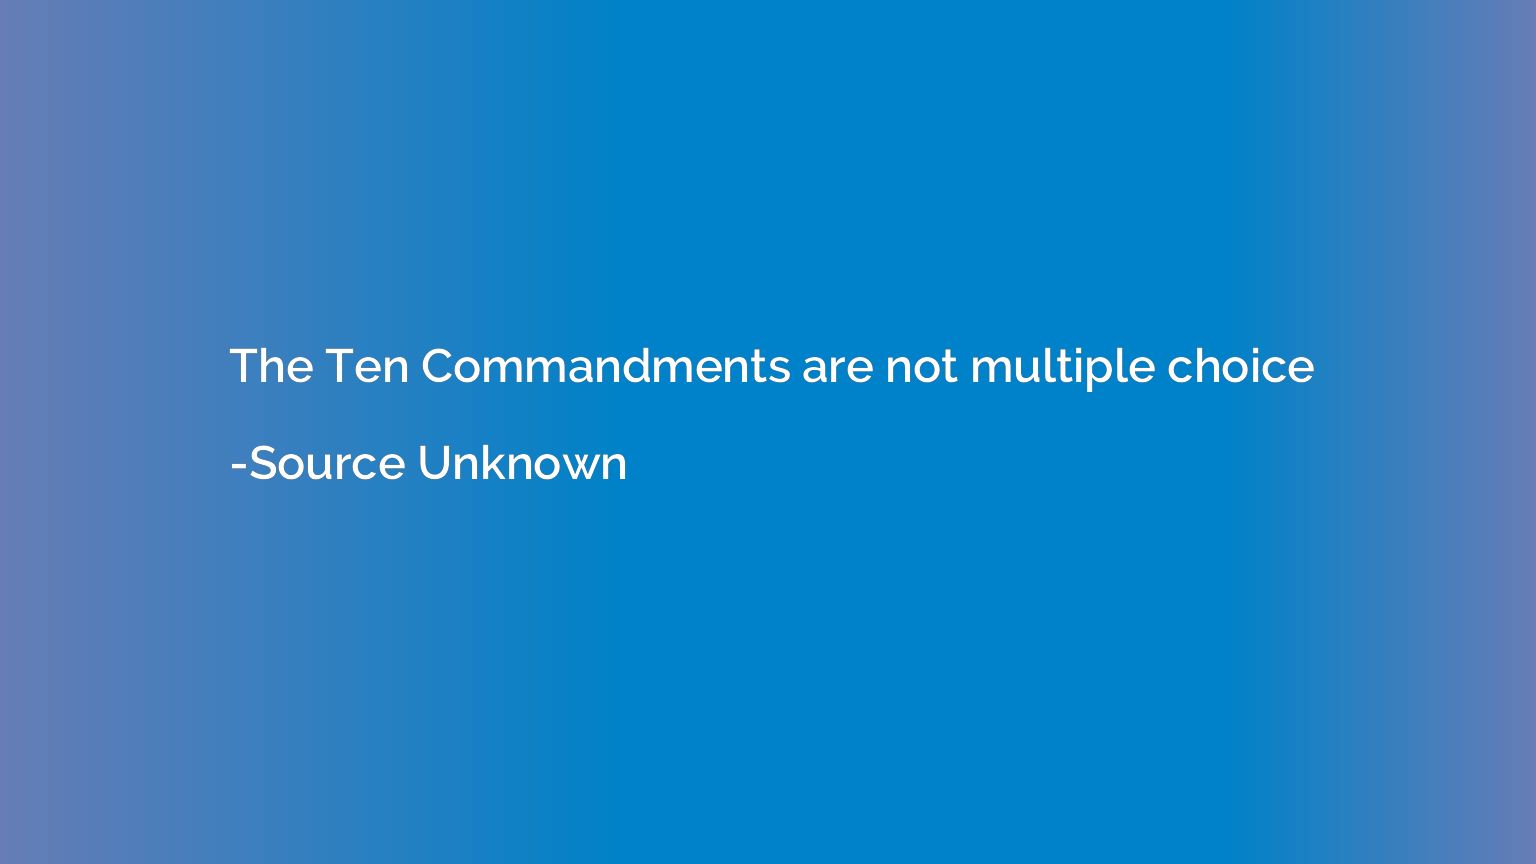 The Ten Commandments are not multiple choice